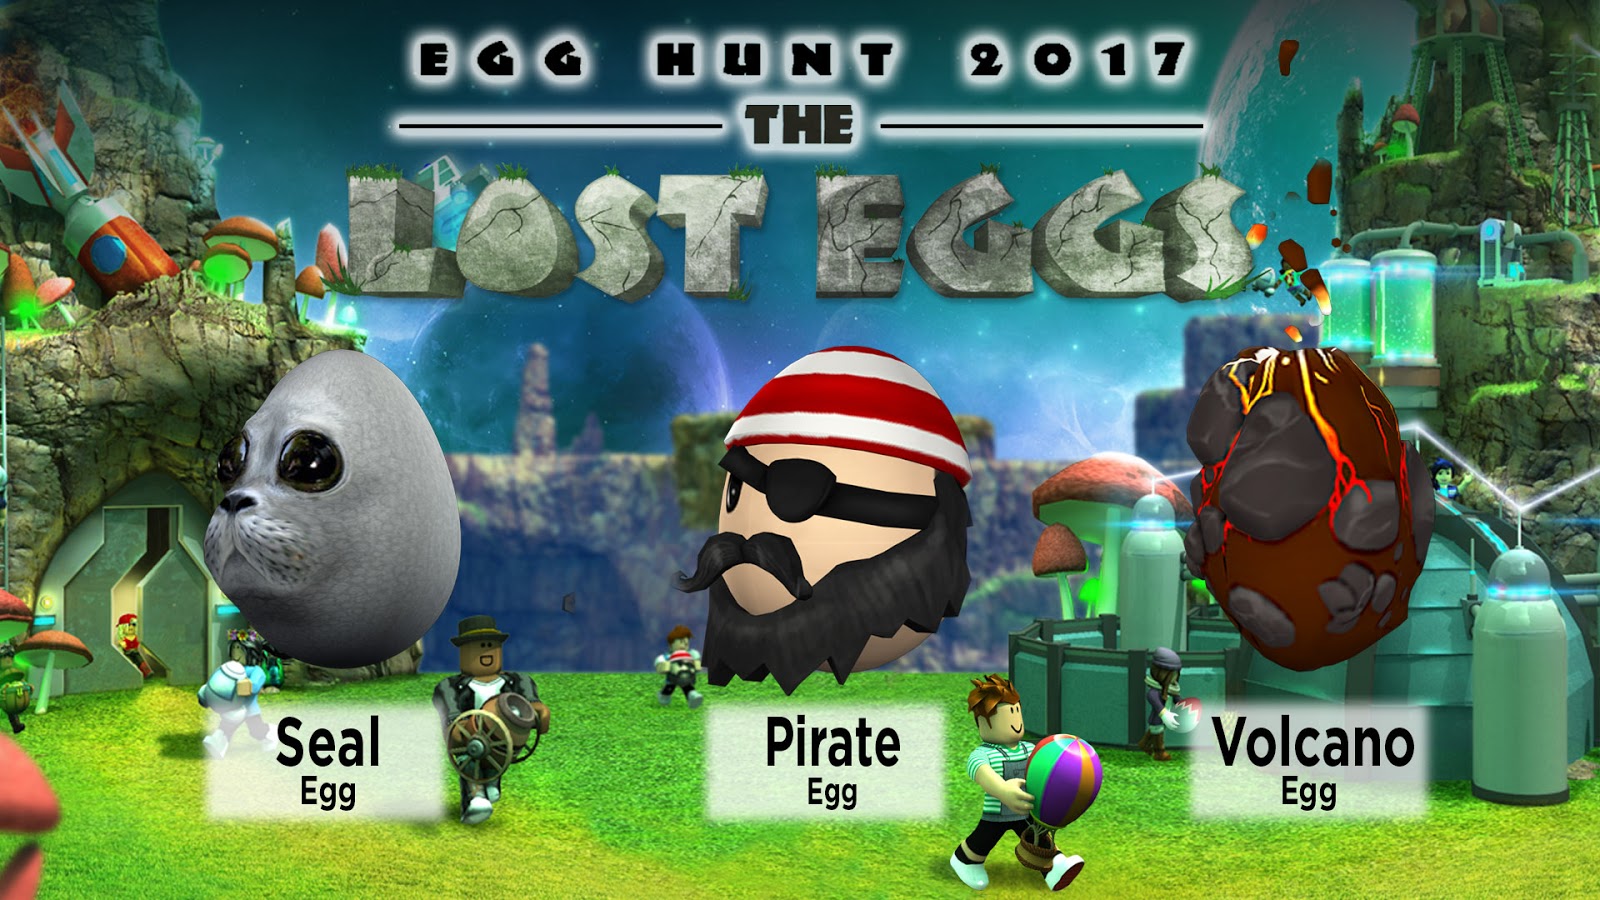 Giveaway Roblox Egg Hunt Prize Pack Mommy Katie - roblox days of knights mix n match set walmartcom